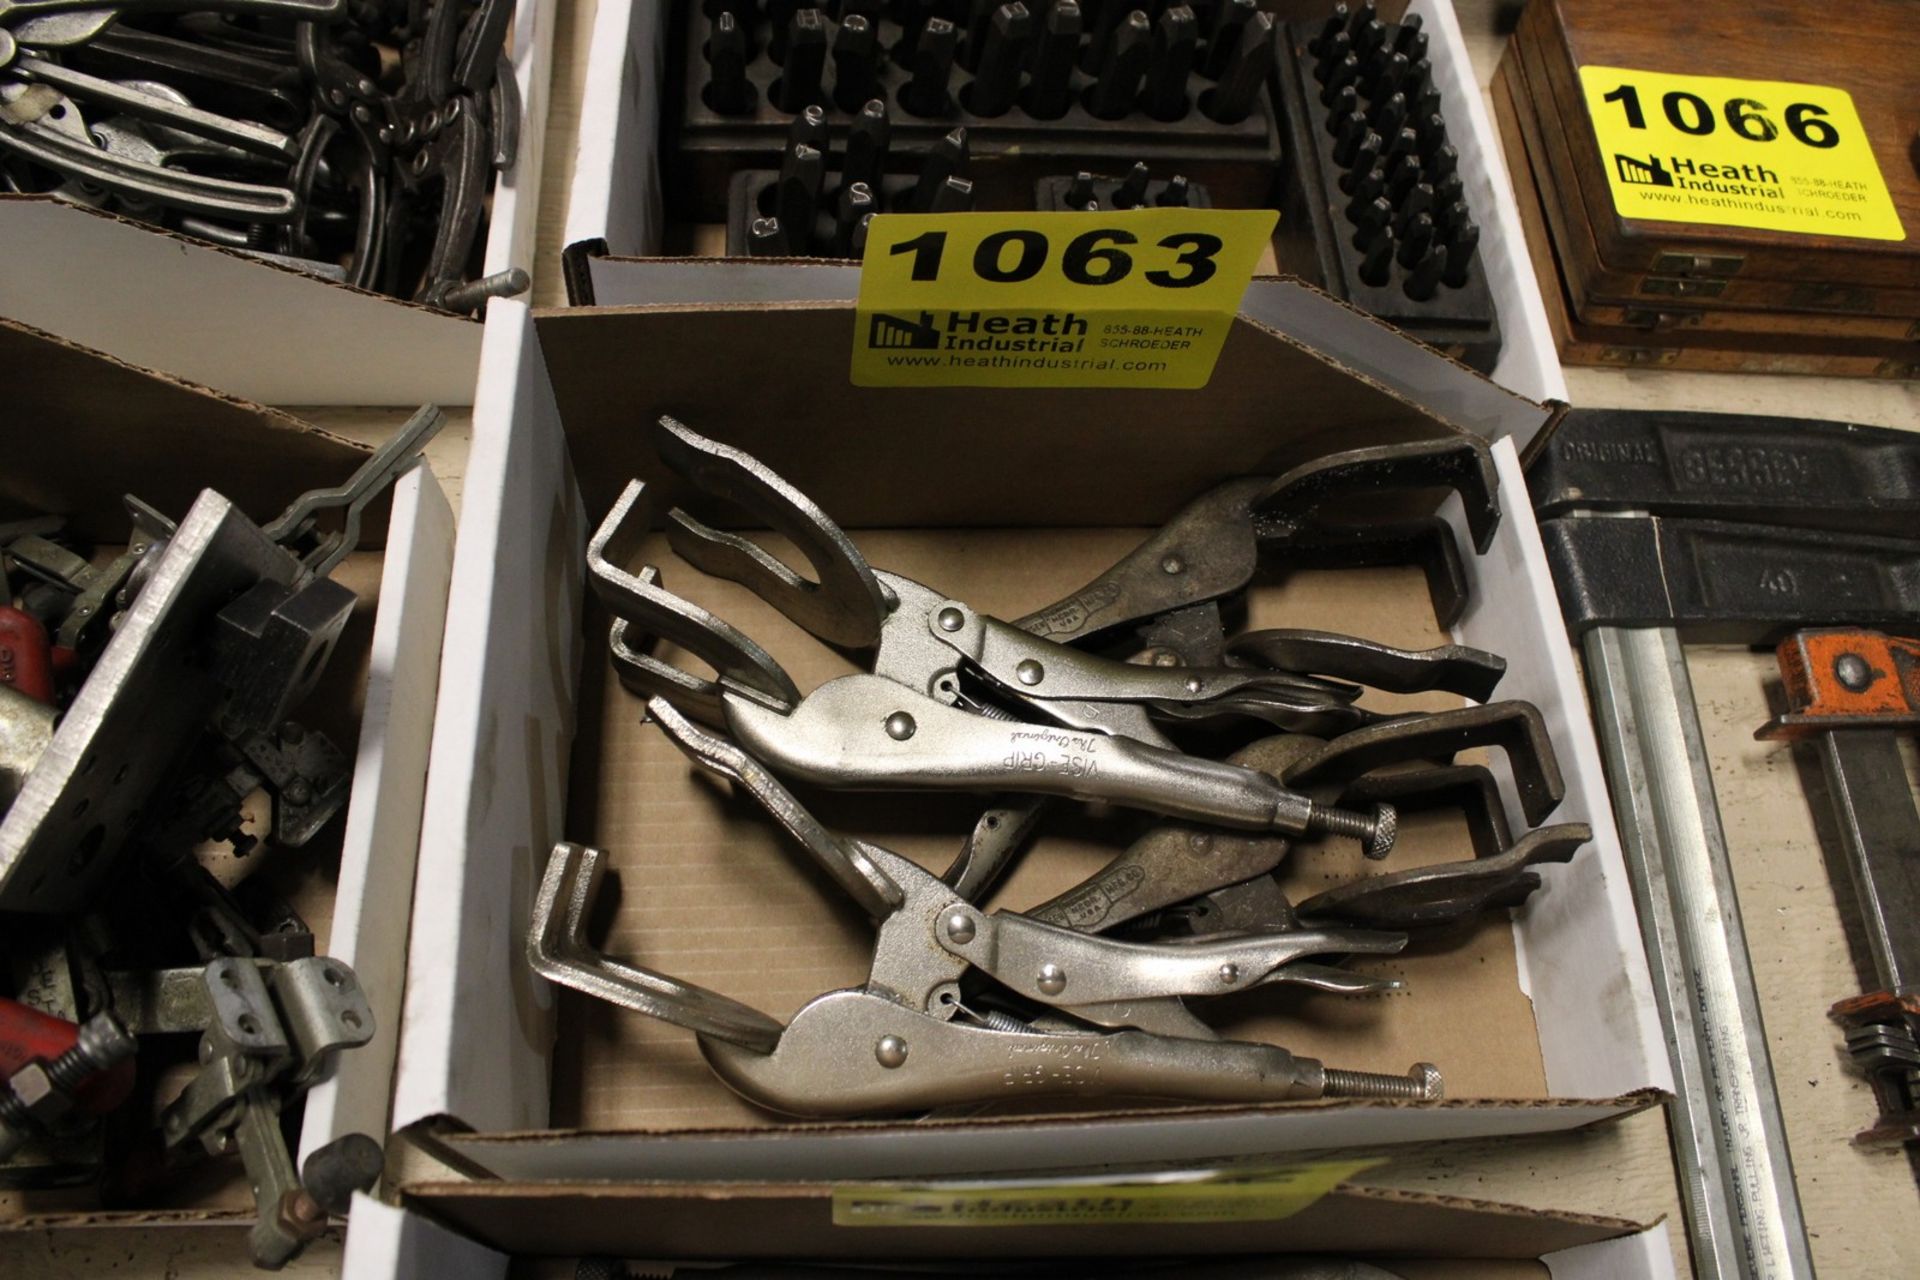 (4) ASSORTED CLAMPING PLIERS